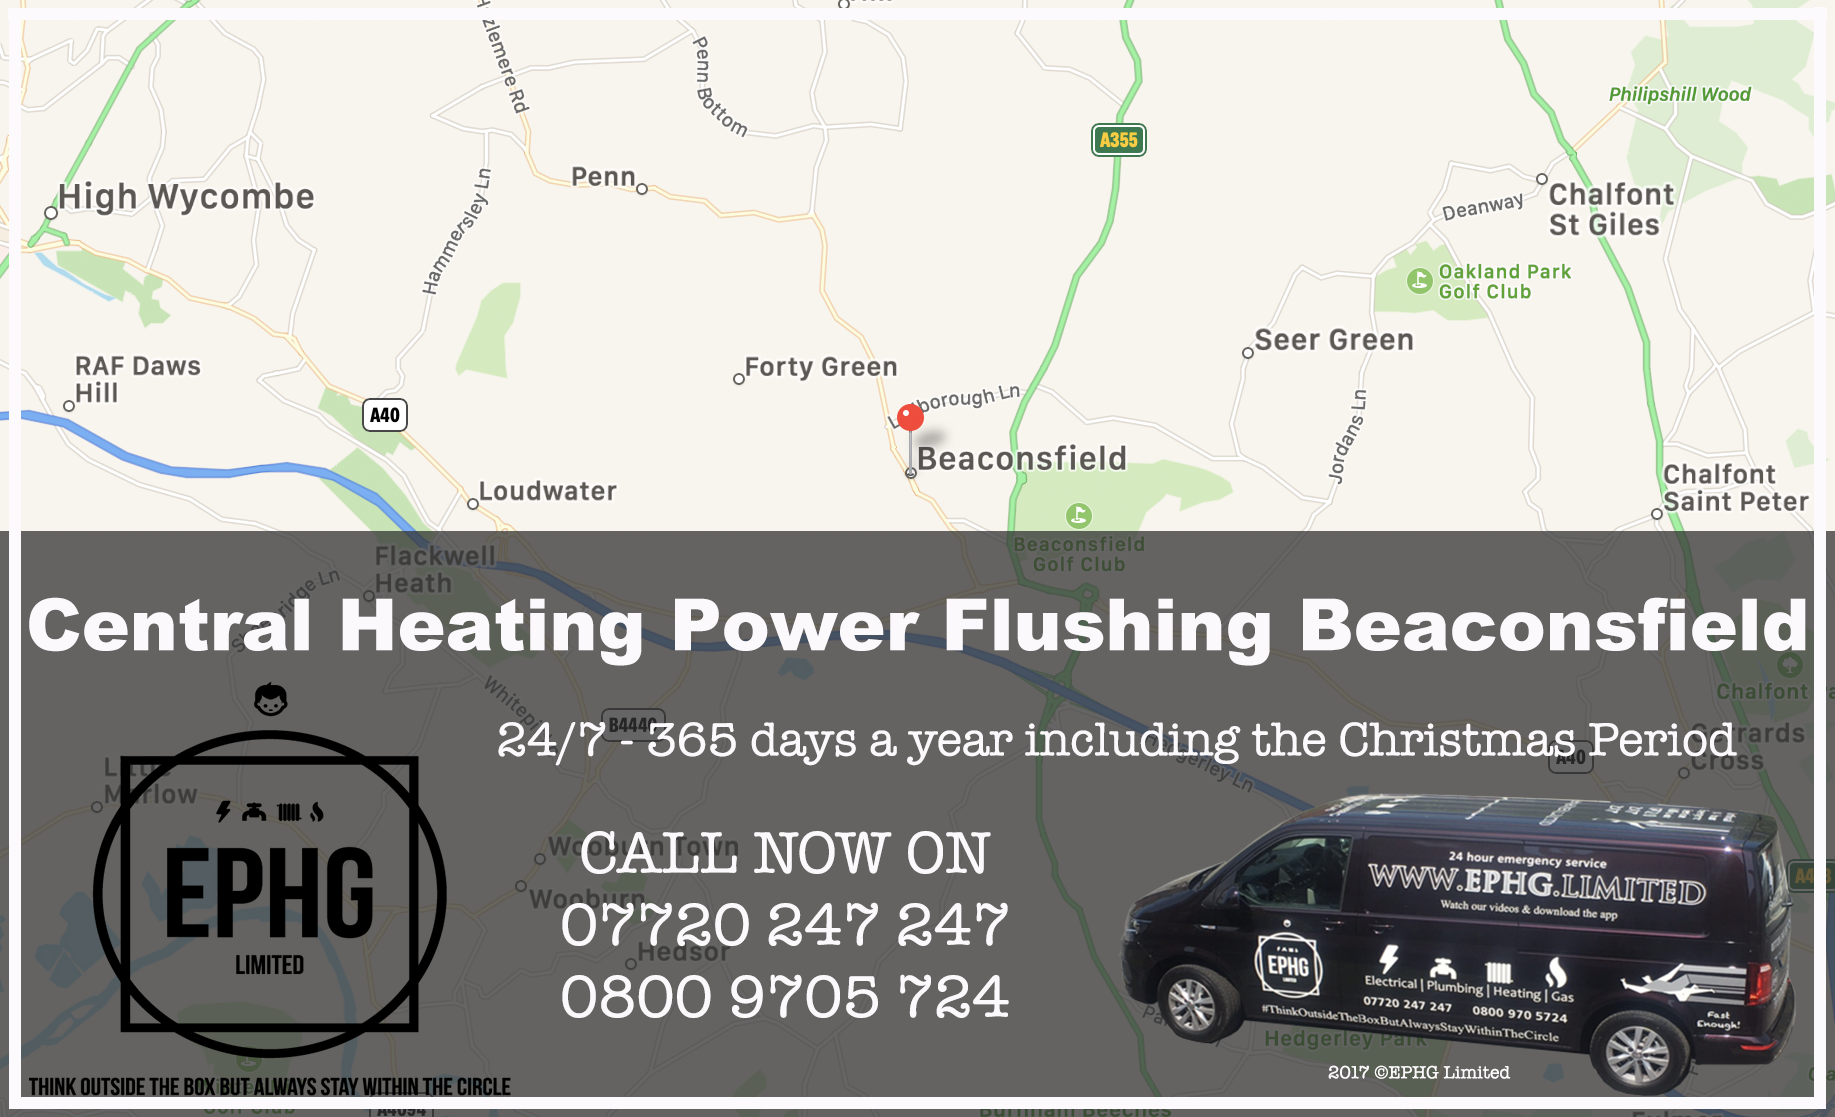 Central Heating Power Flush Beaconsfield